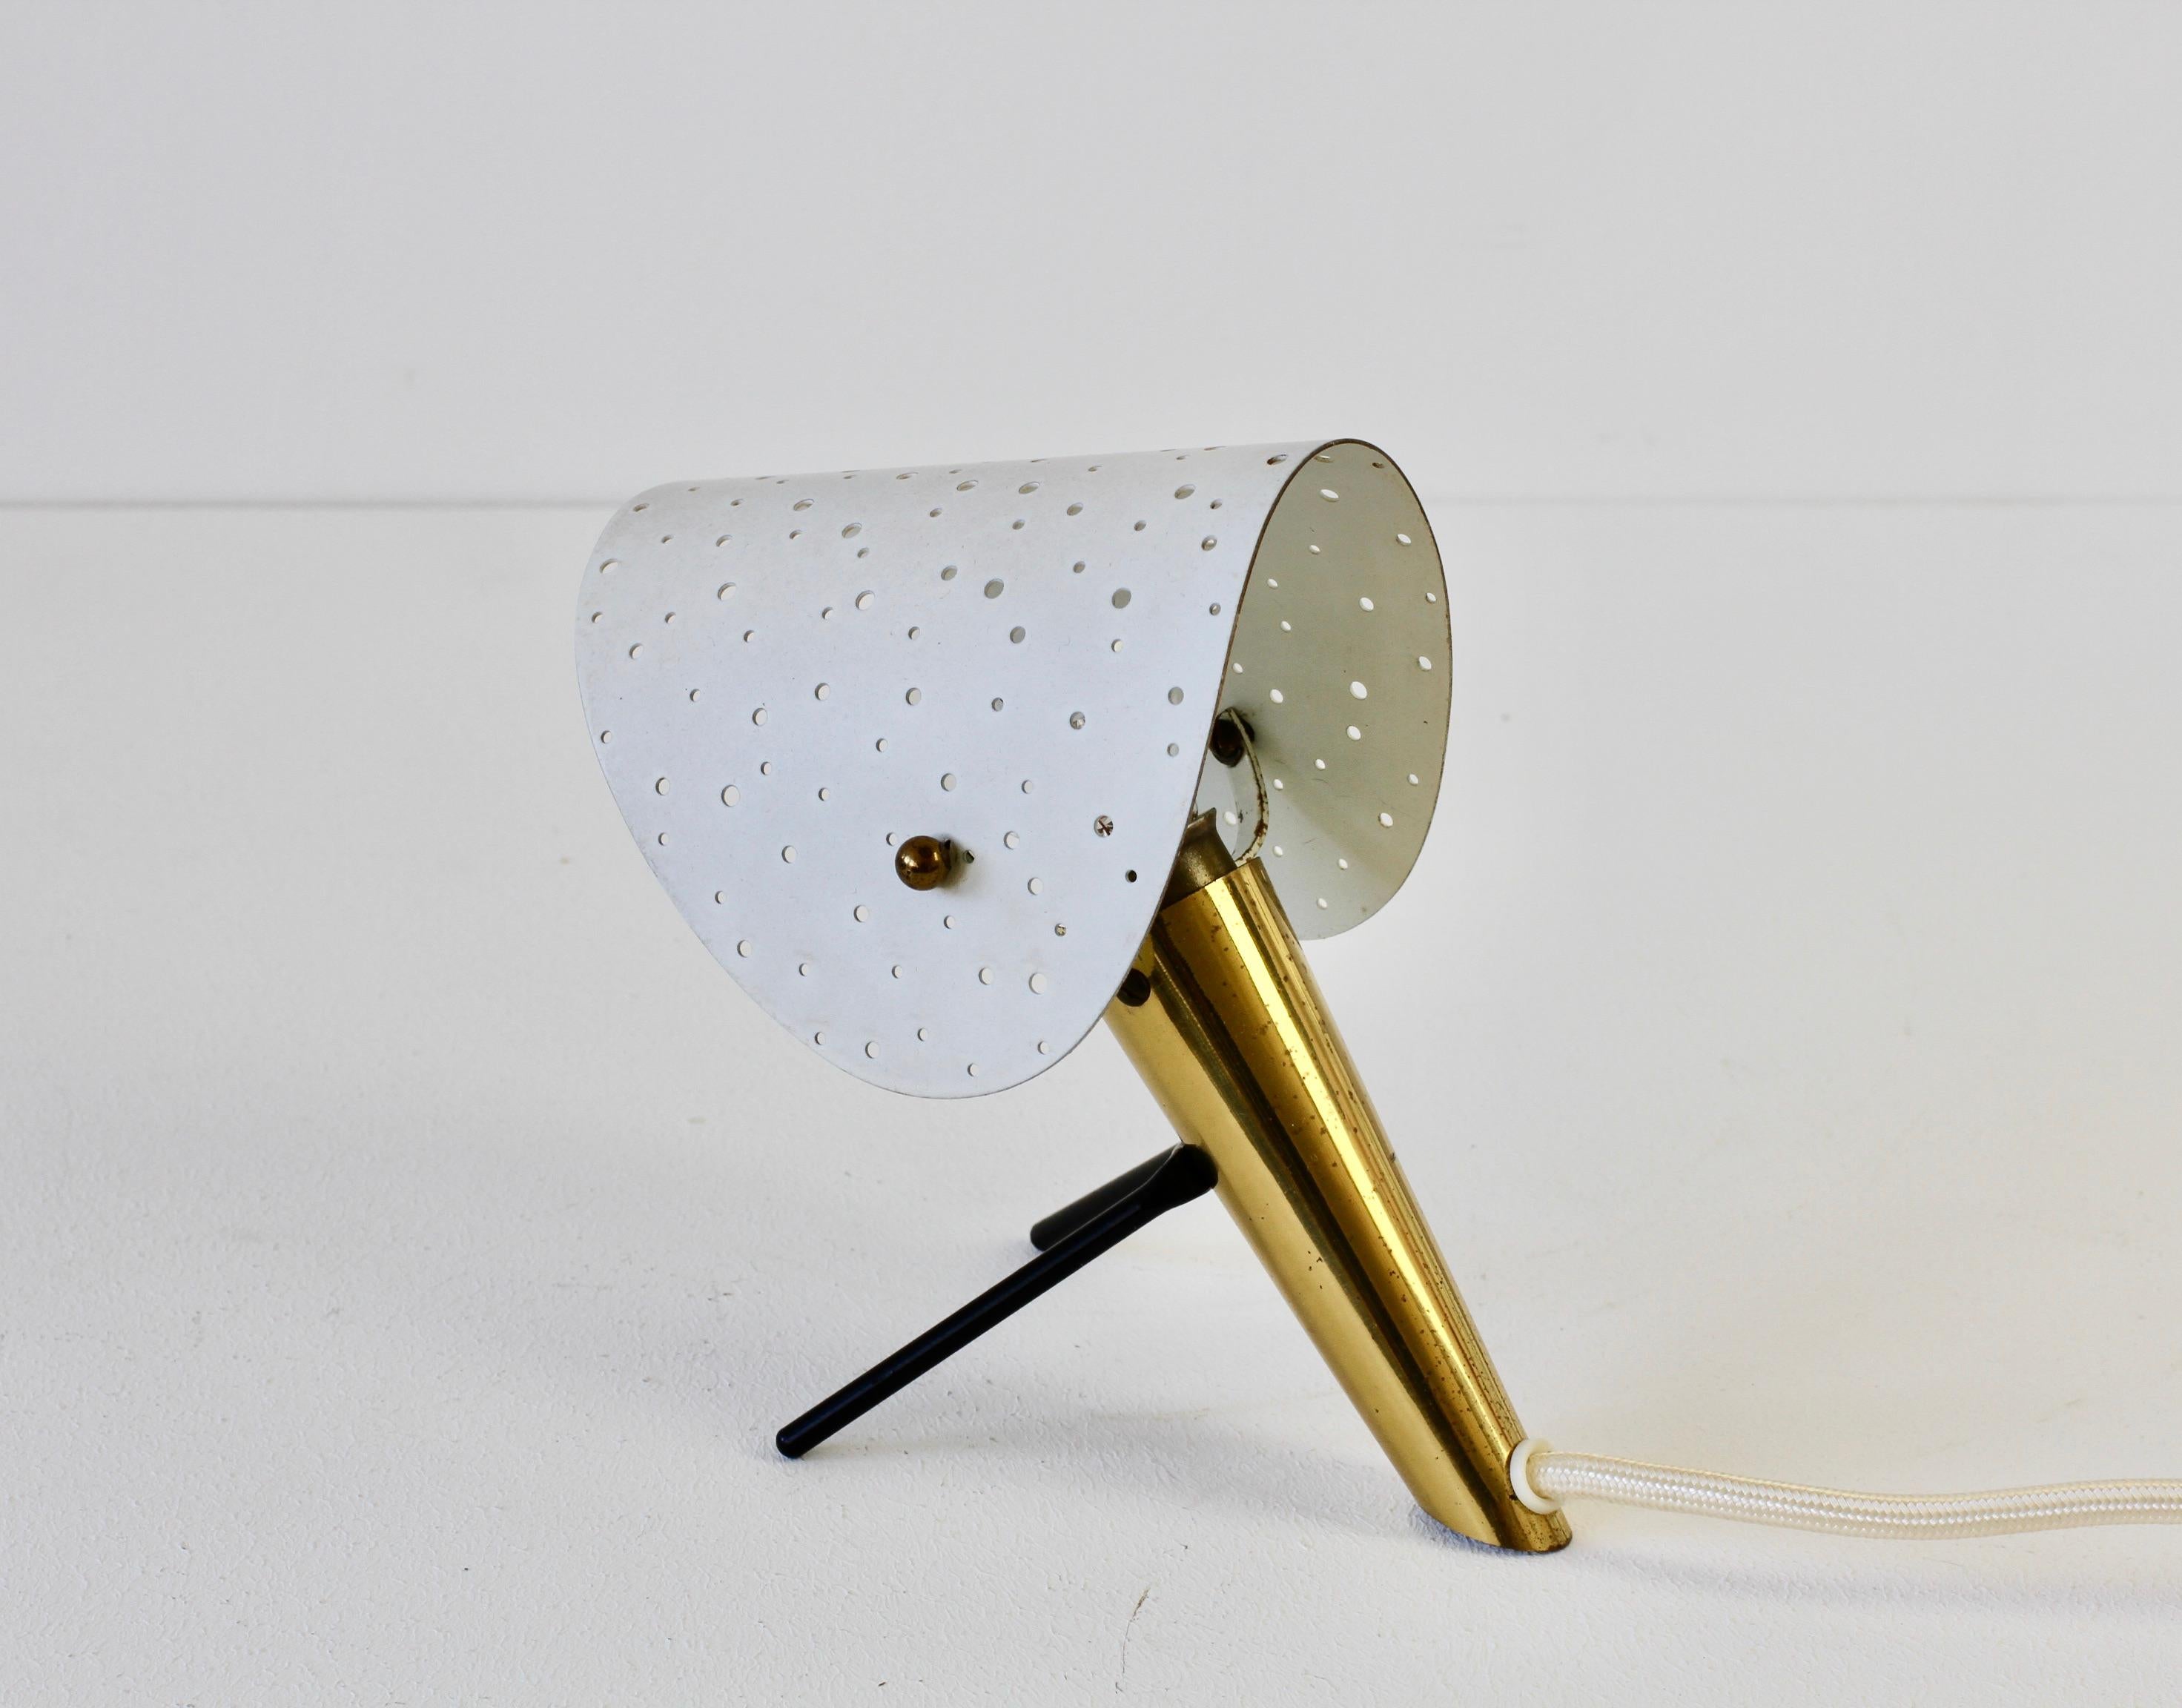 20th Century 1950s Midcentury Perforated Metal & Brass Table Lamp or Desk Light by Ernst Igl